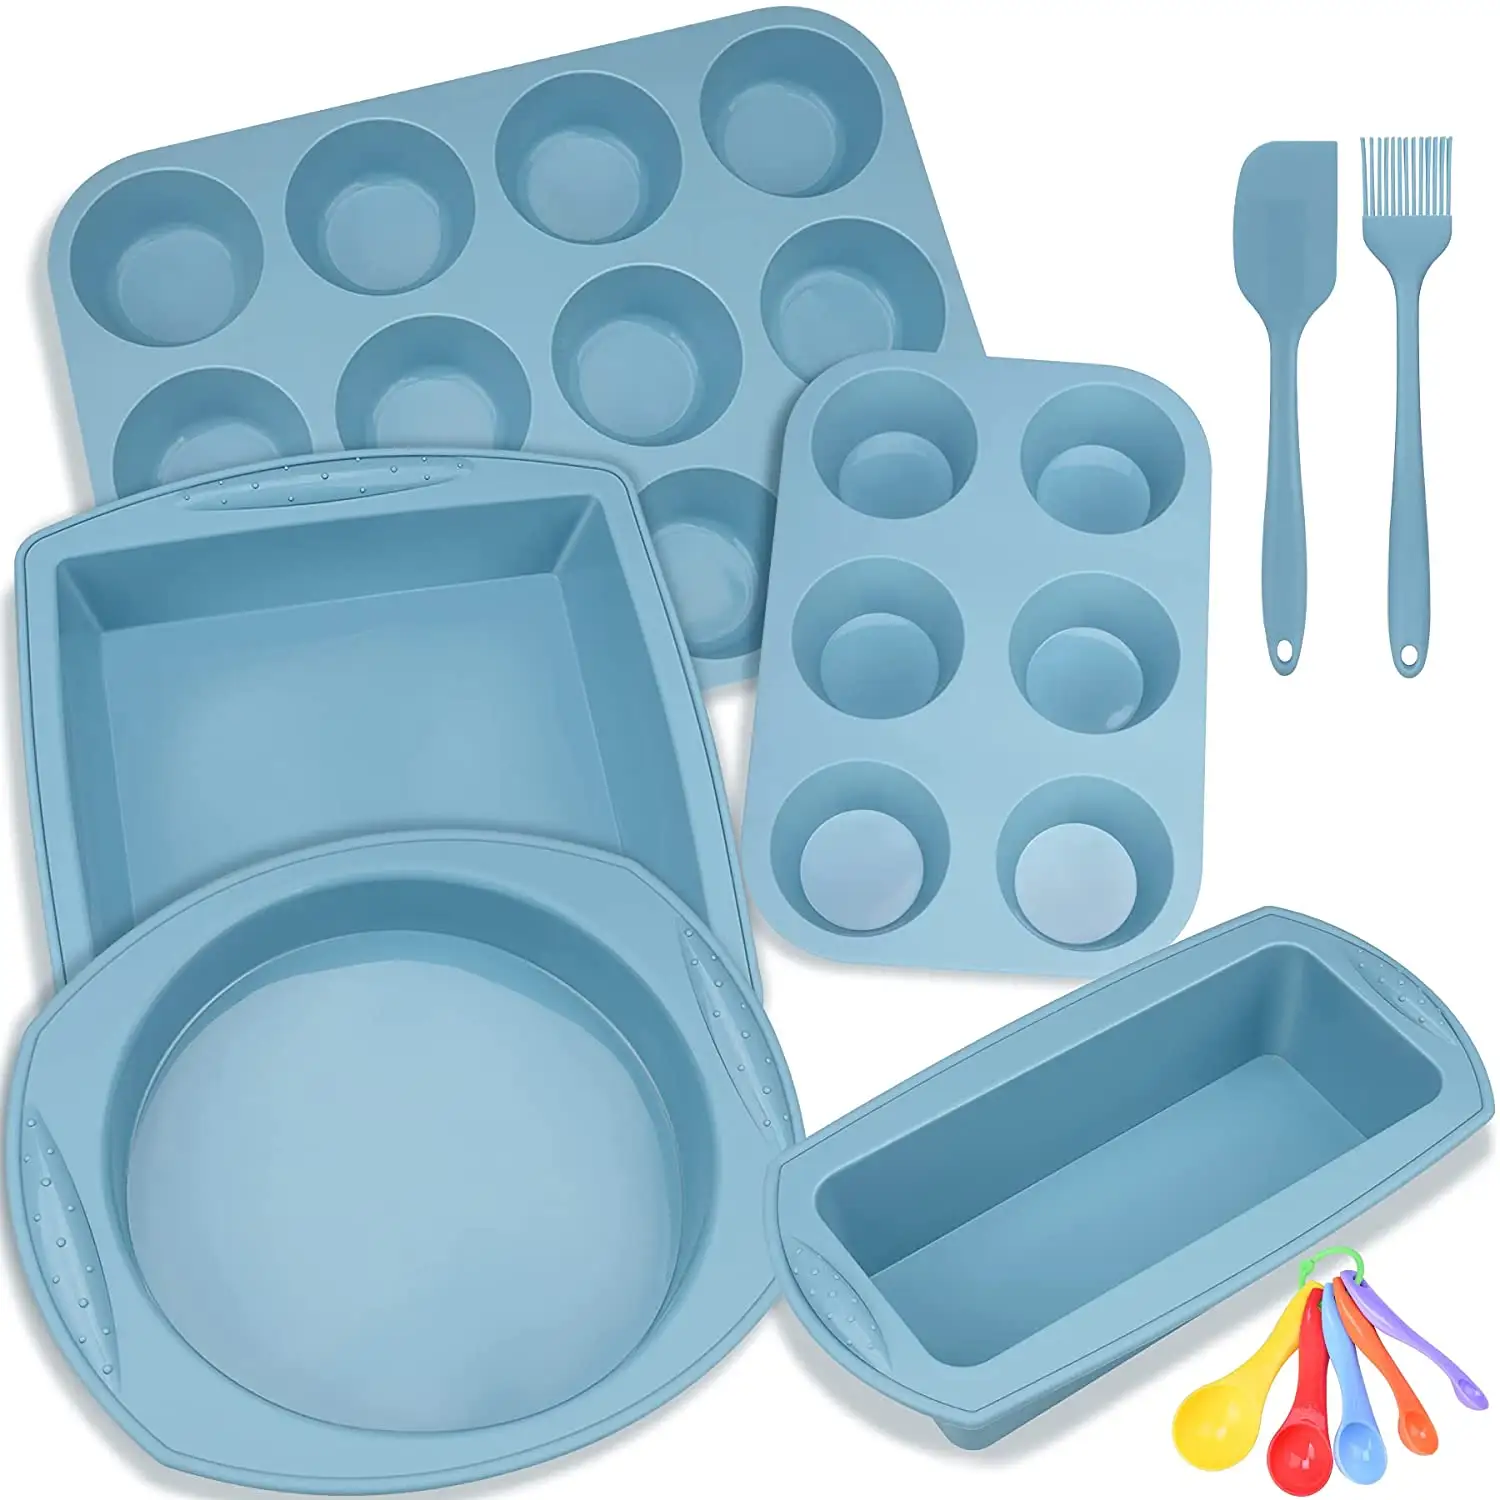 Pastry Bakeware Tools Professional Layer Bakery Muffin Cupcake Bread Molds Baking Pan Silicone Cake Mold Set